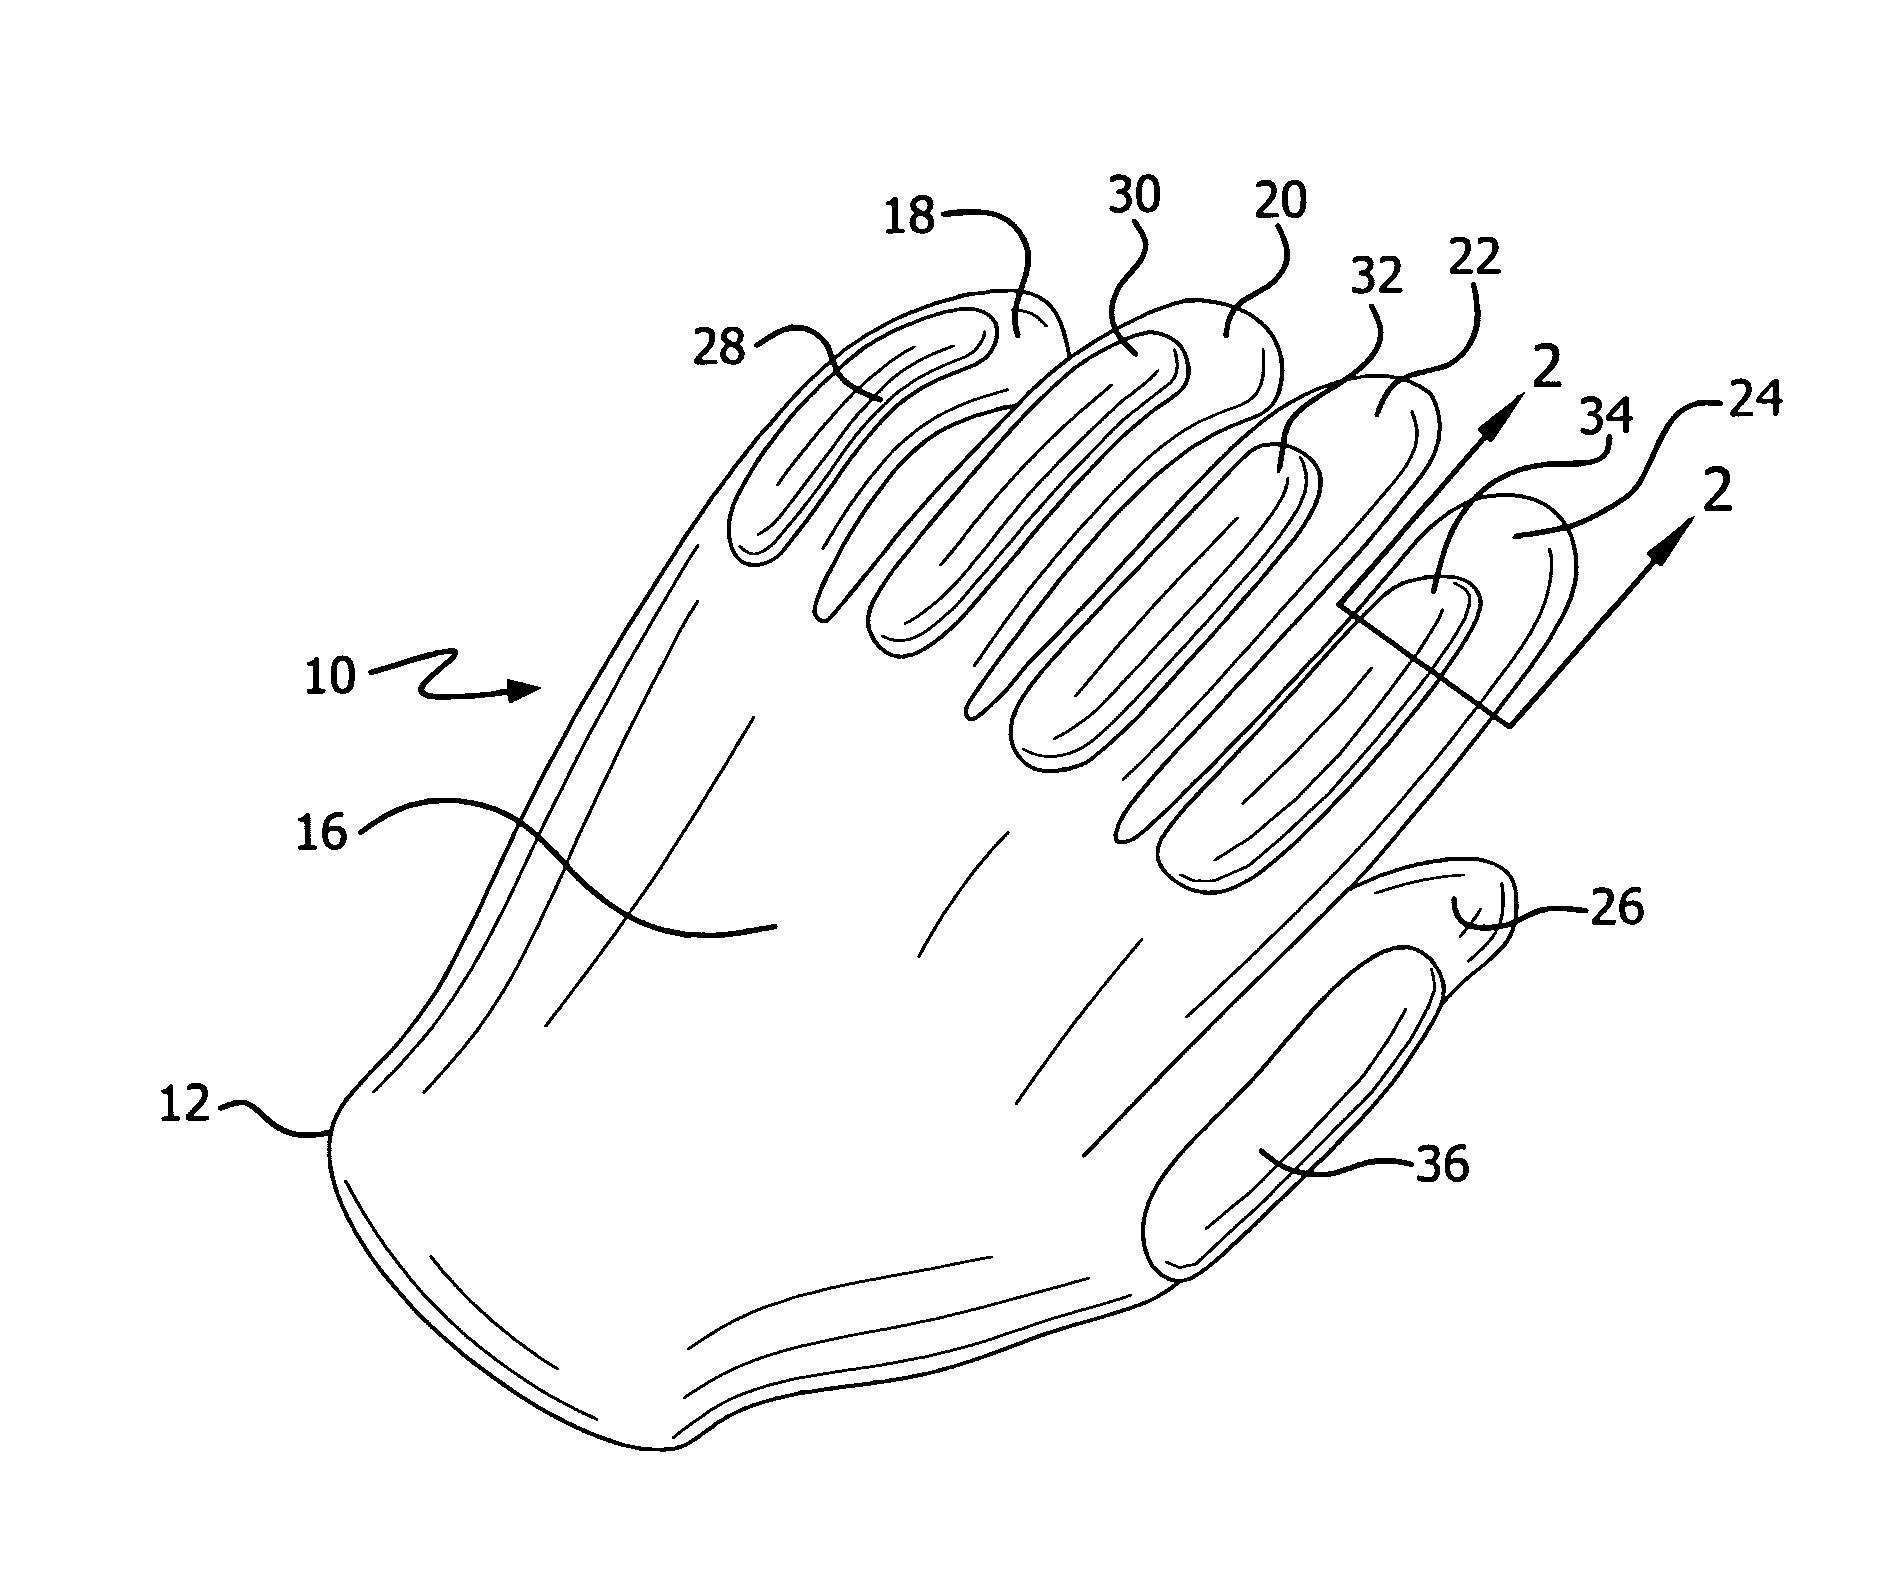 Heated disposable gloves